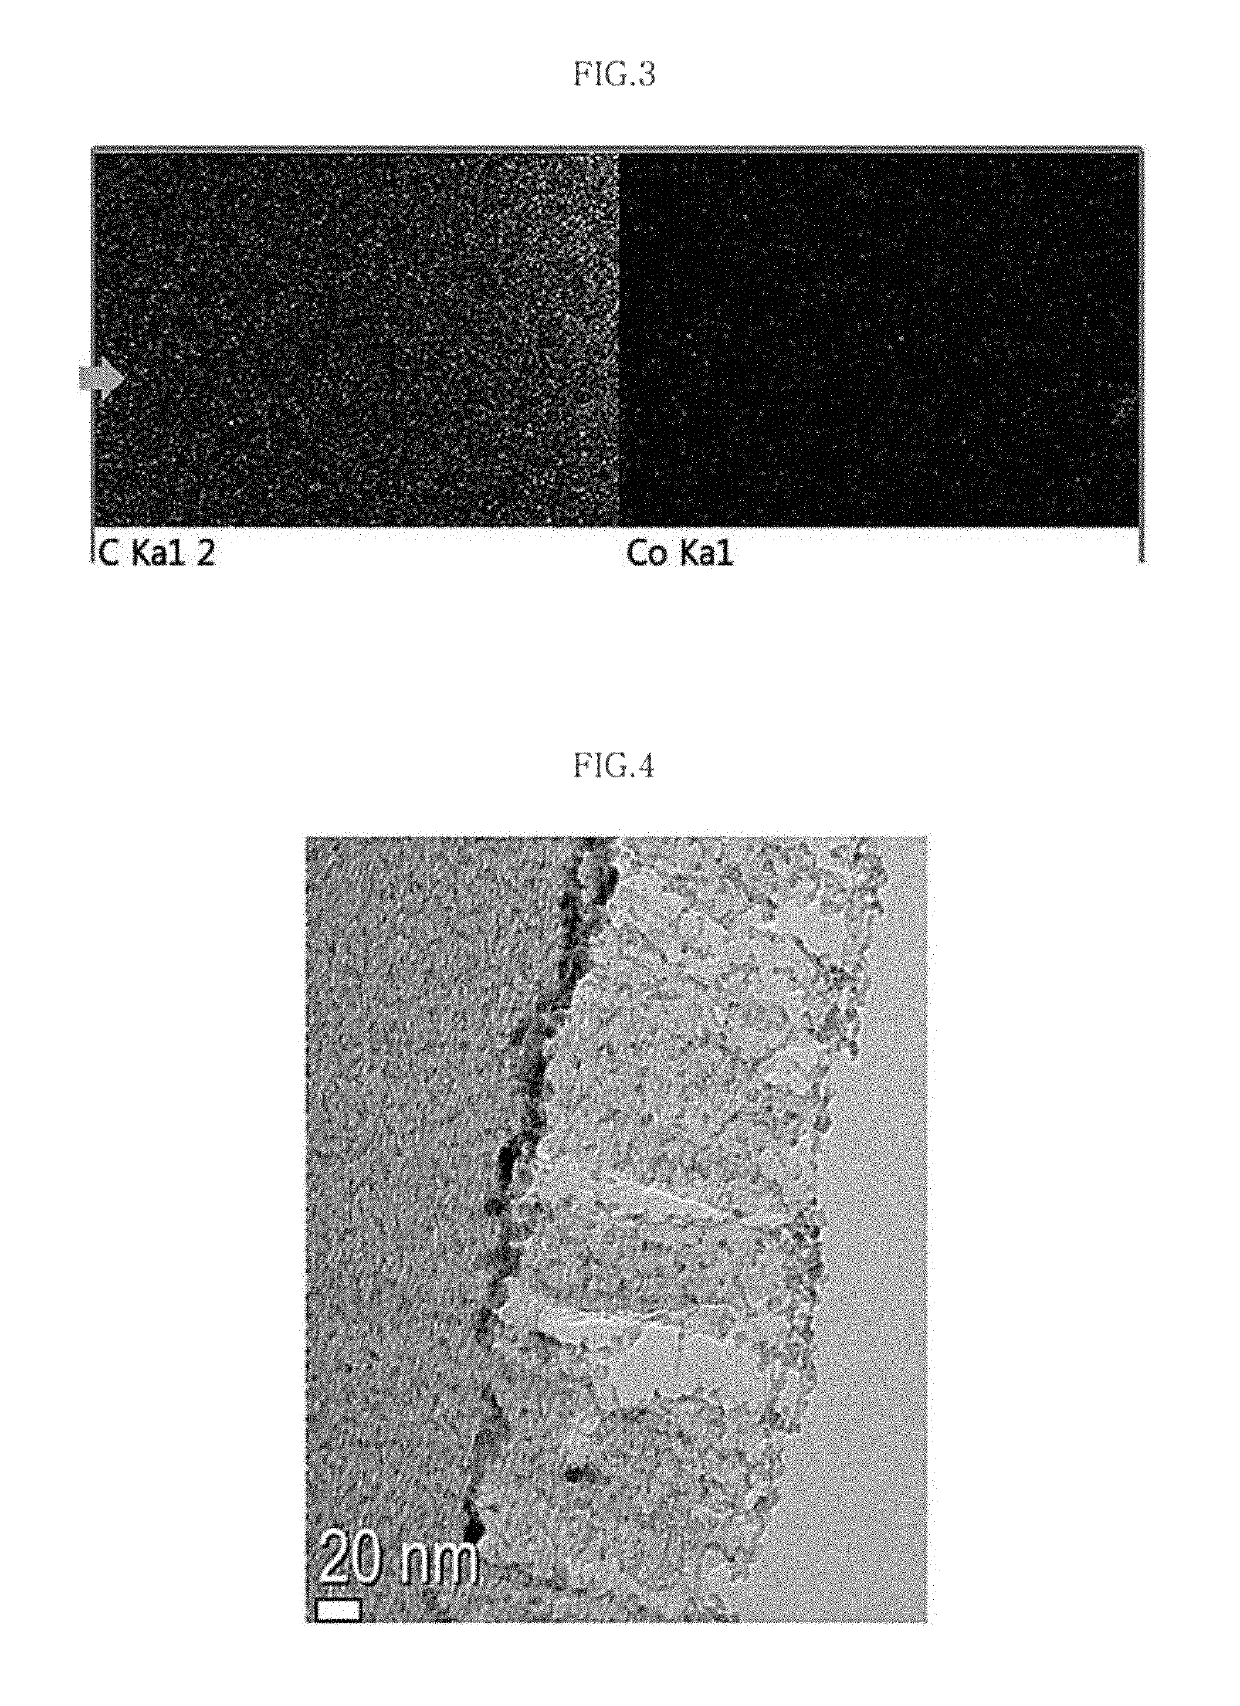 Porous carbon materials and methods of manufacturing the same